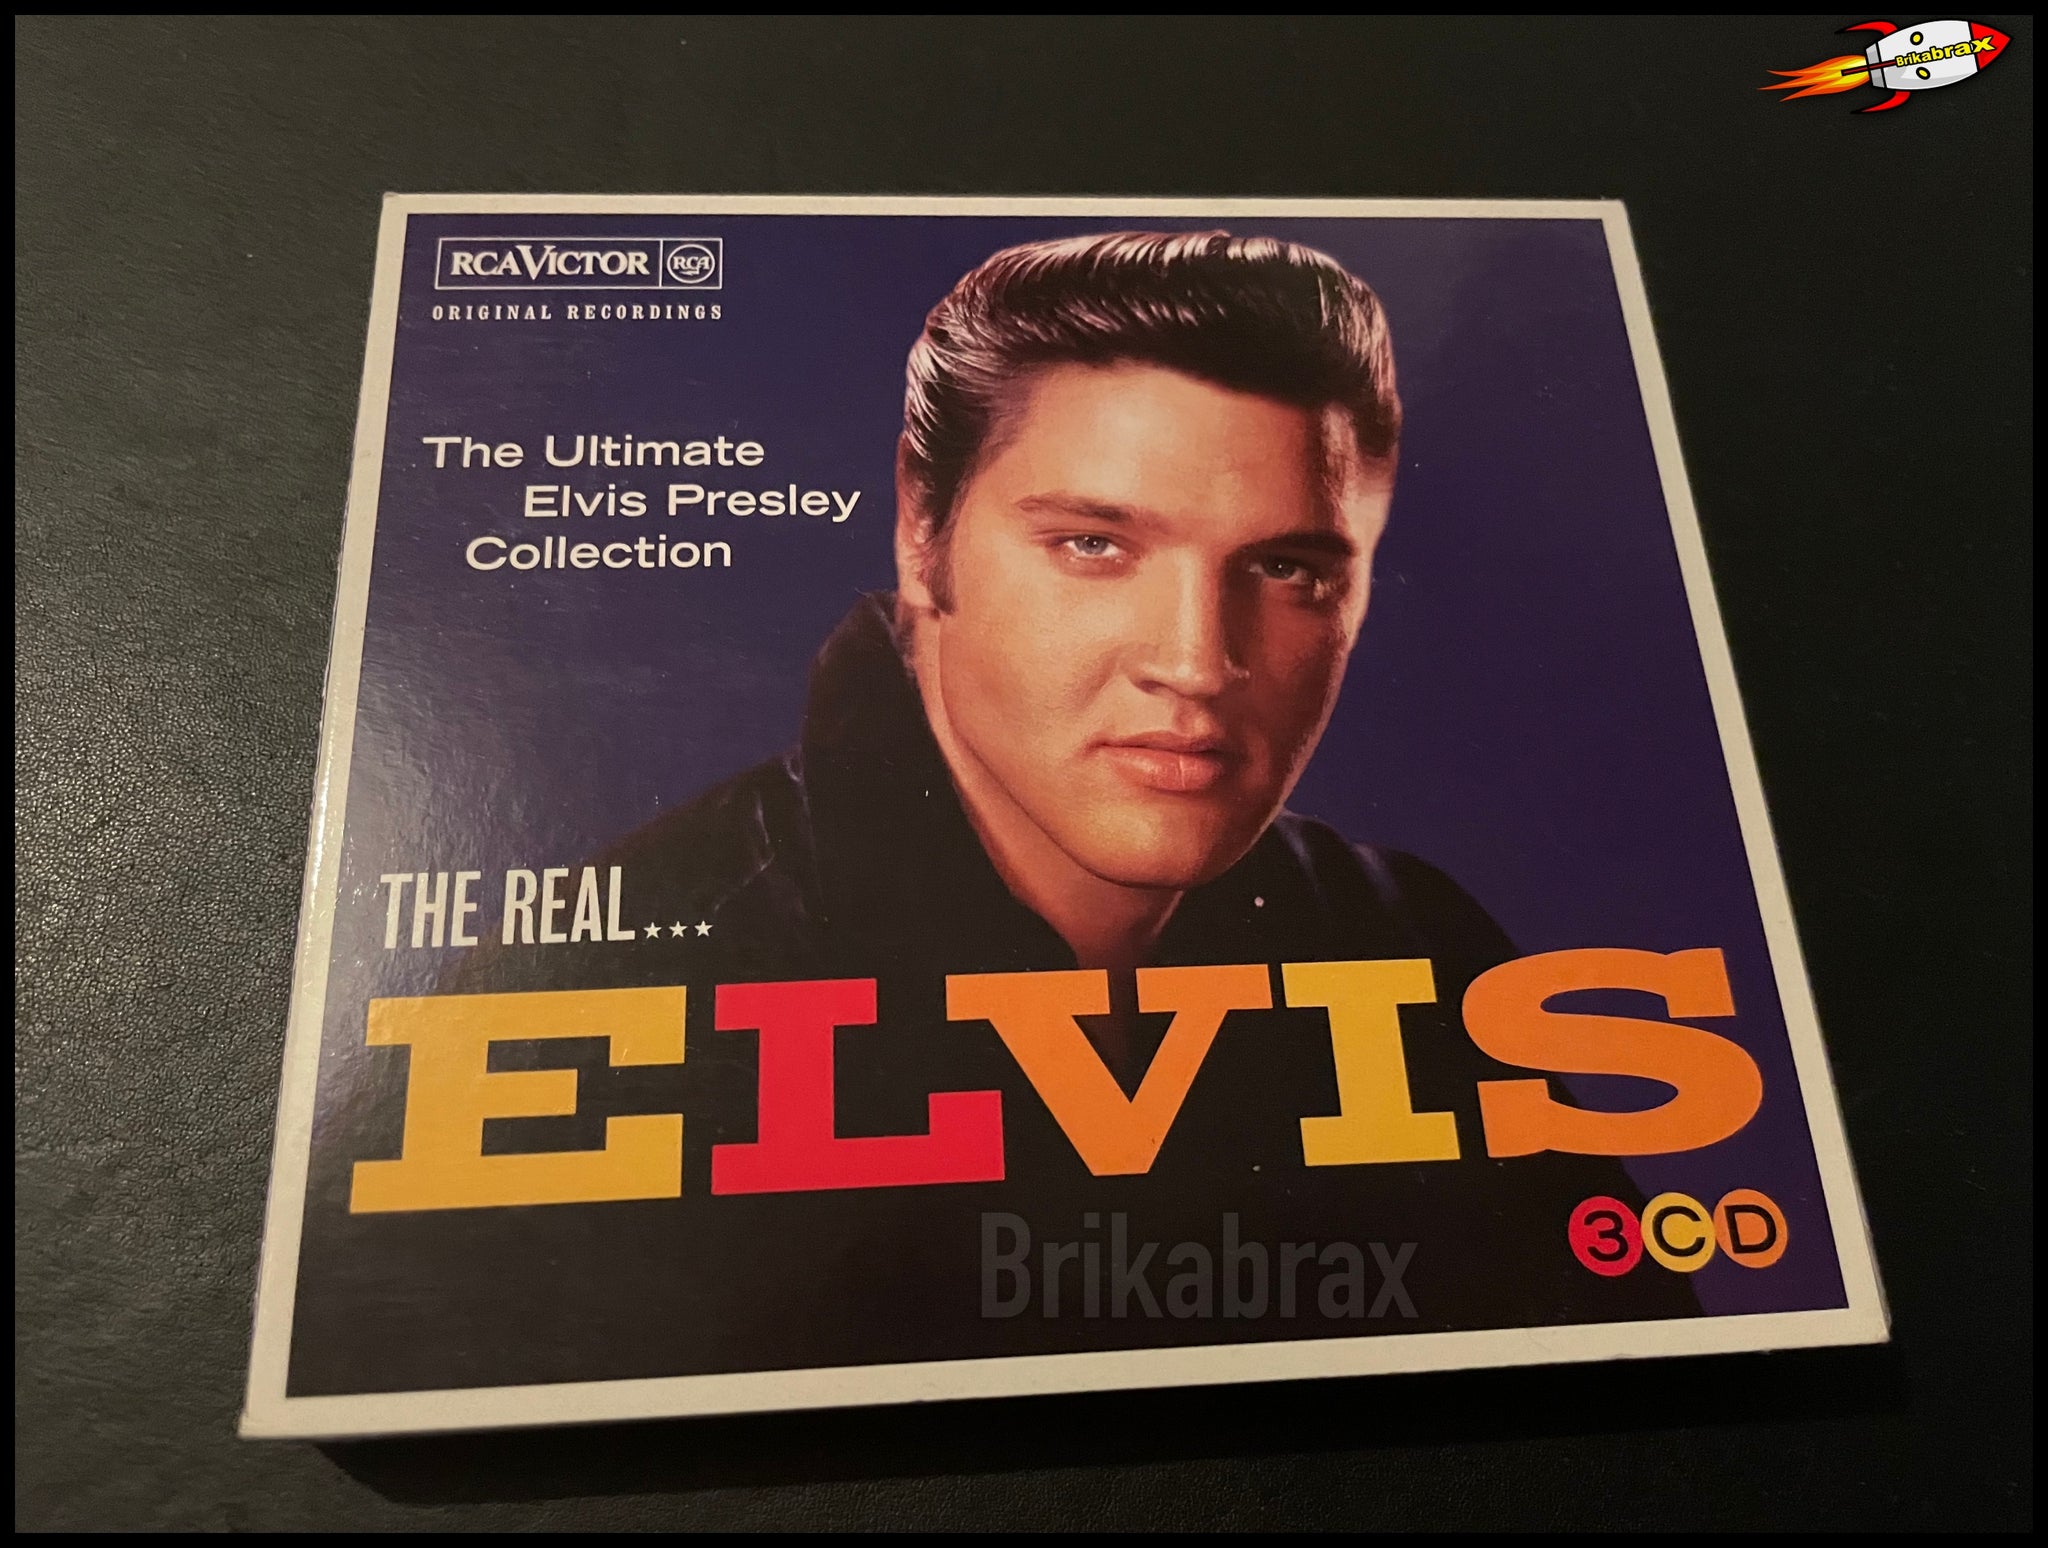 The Ultimate Elvis Presley Collection: The Real Elvis 3 CD Album - RCA-Victor Music 2011